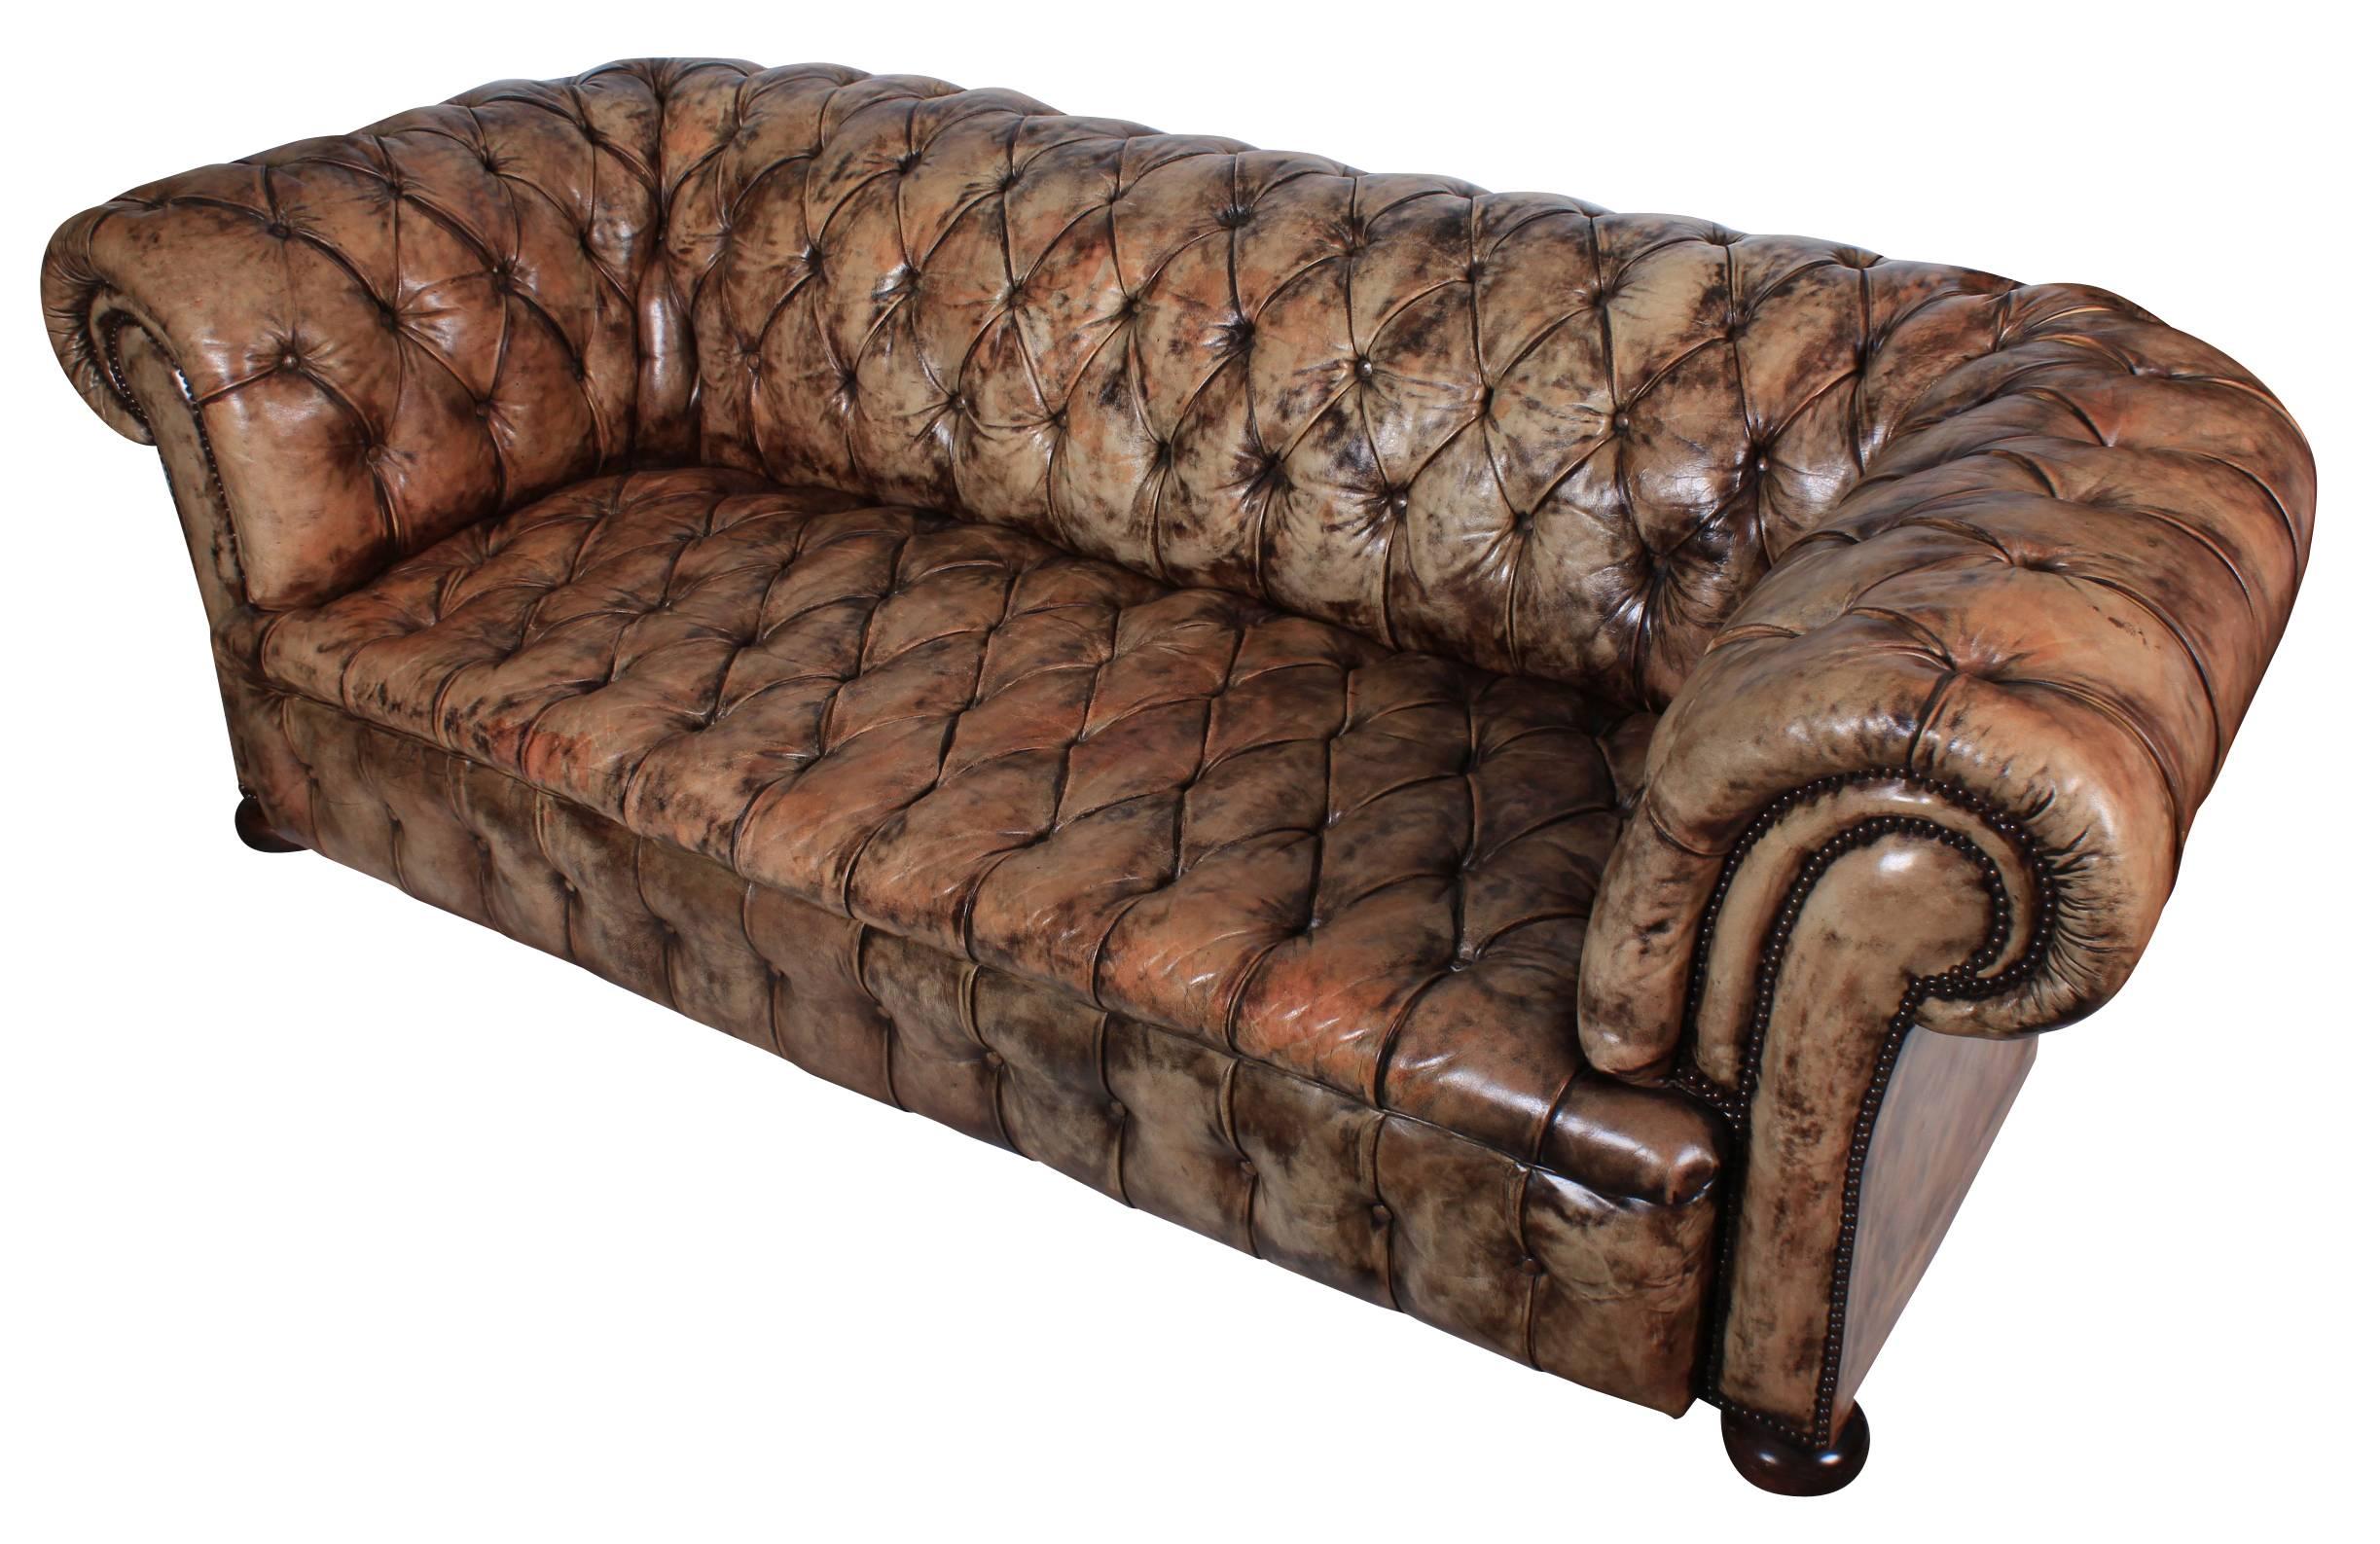 Early 20th Century Vintage Green/Tan Leather Chesterfield Sofa For Sale